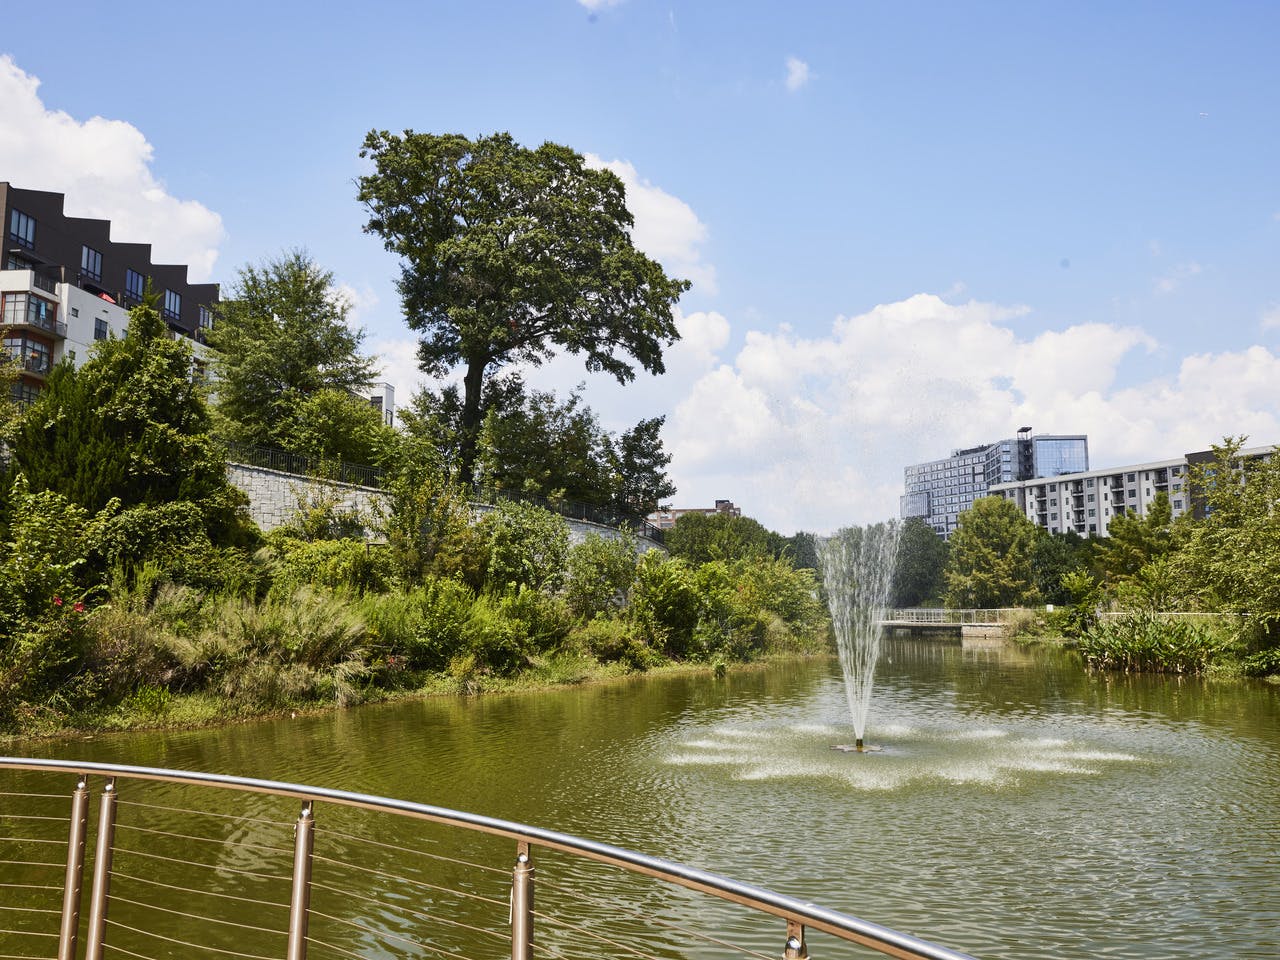 A water feature is located in a large pond with greenery and buildings around it.